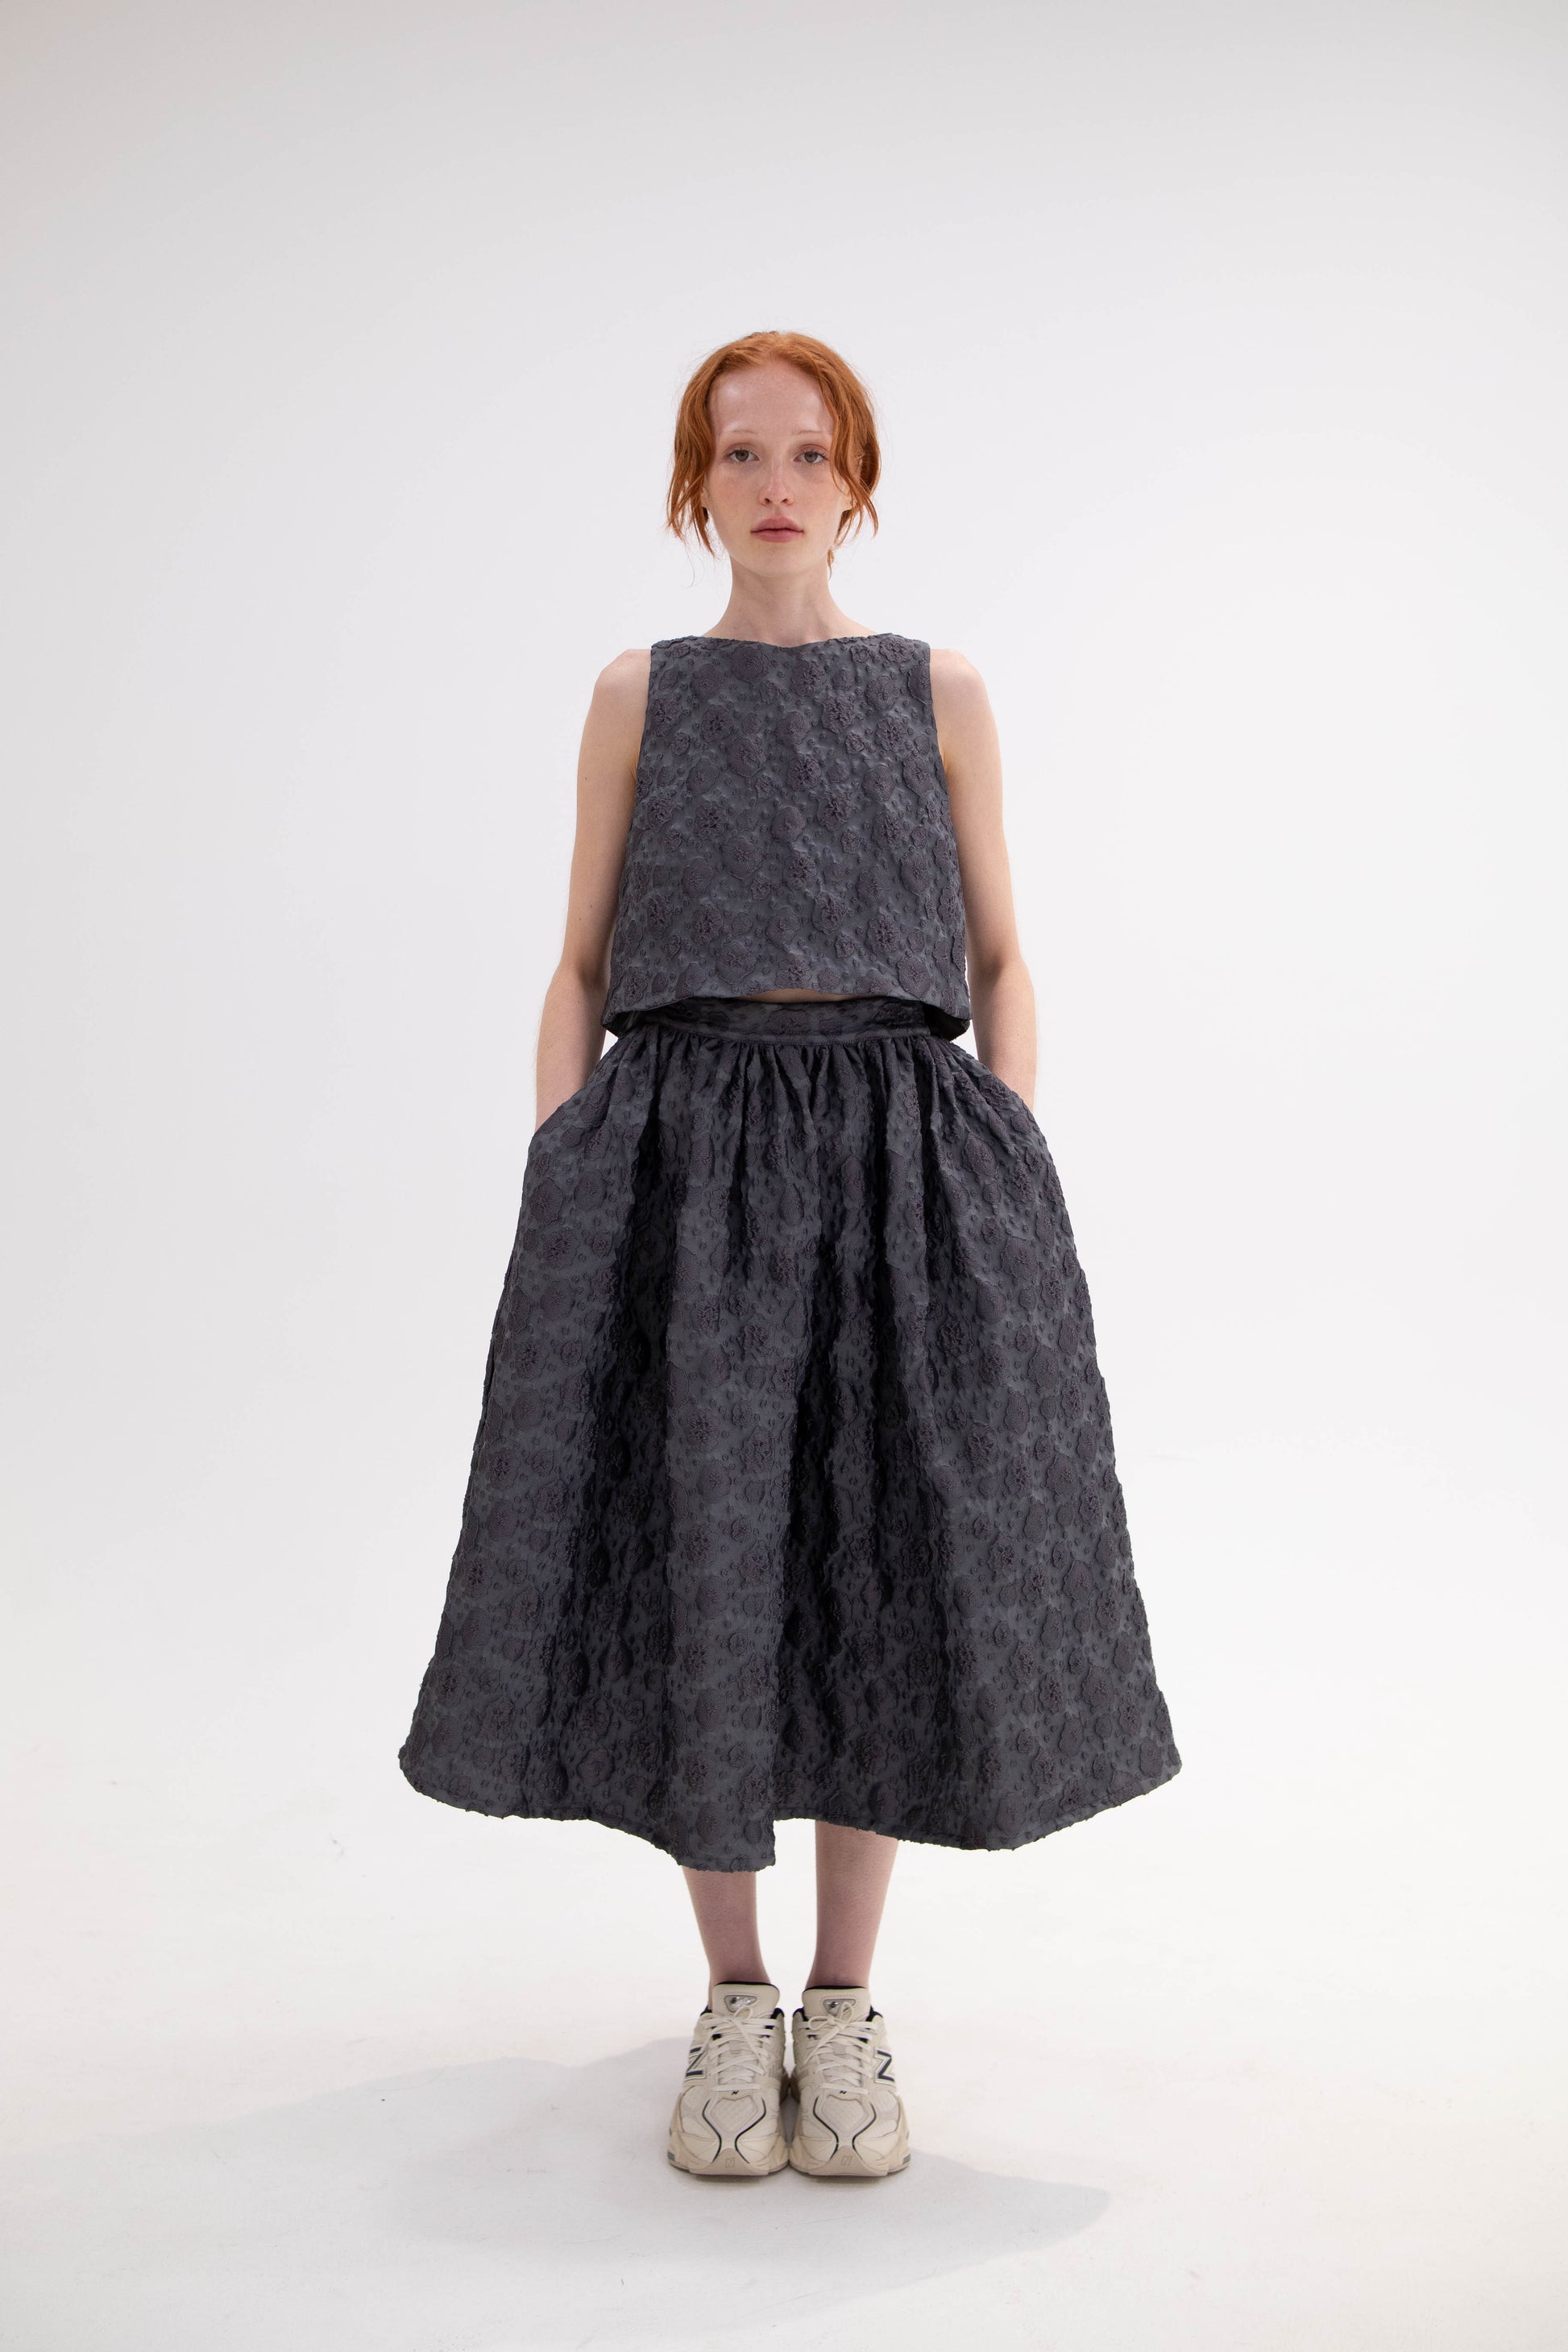 Monique grey, two piece ensemble with hand tied bow and cloud detail, romantic and sophisticated